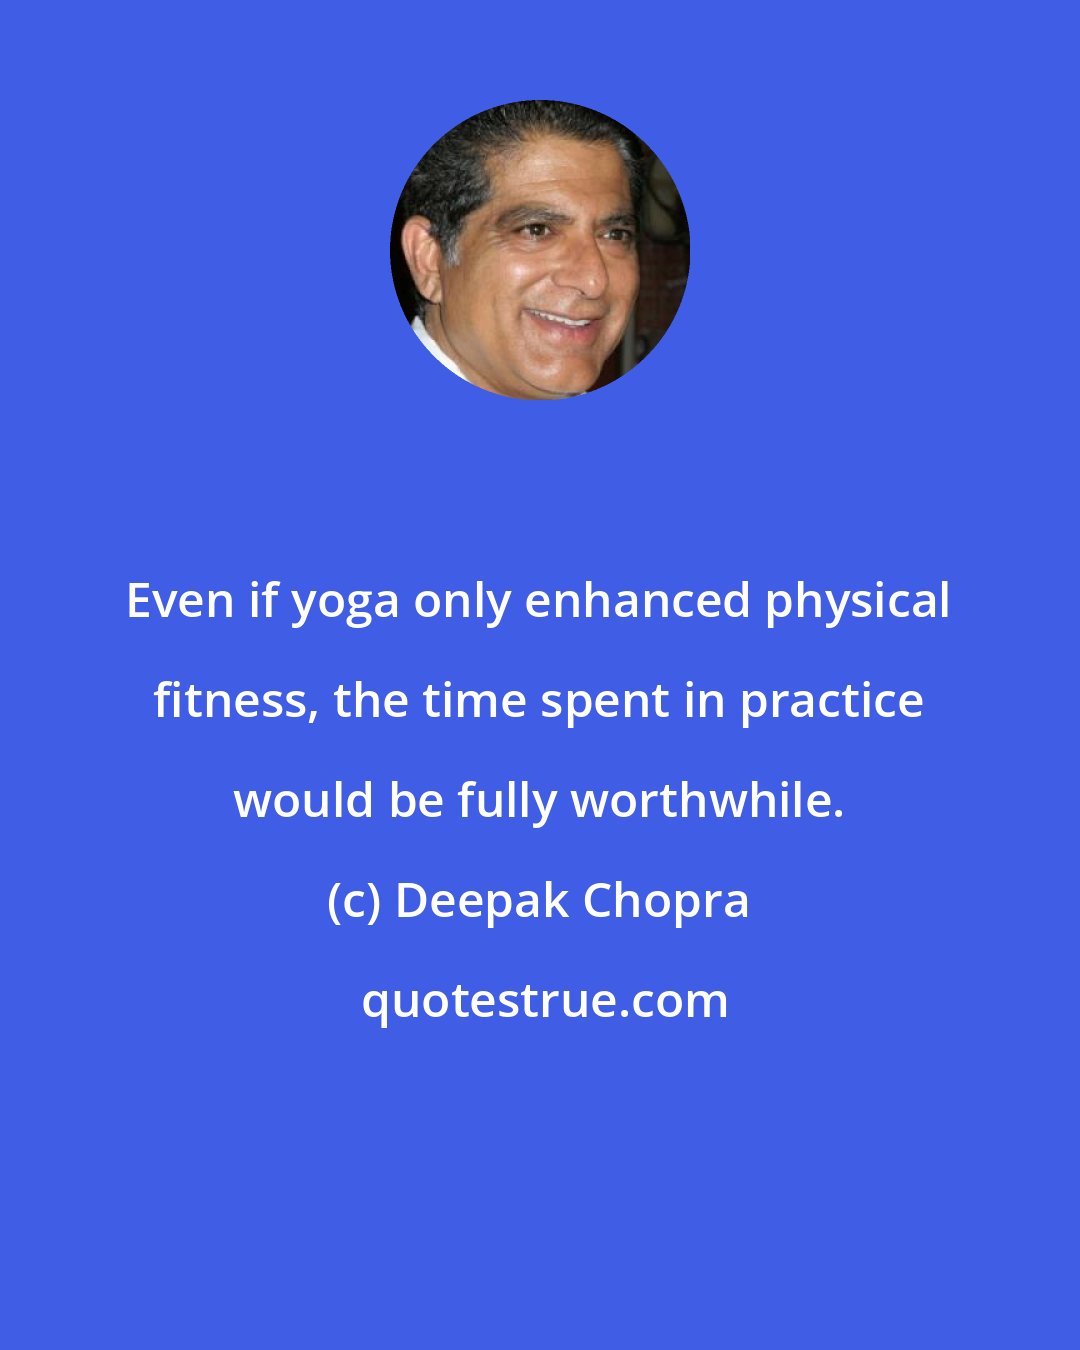 Deepak Chopra: Even if yoga only enhanced physical fitness, the time spent in practice would be fully worthwhile.